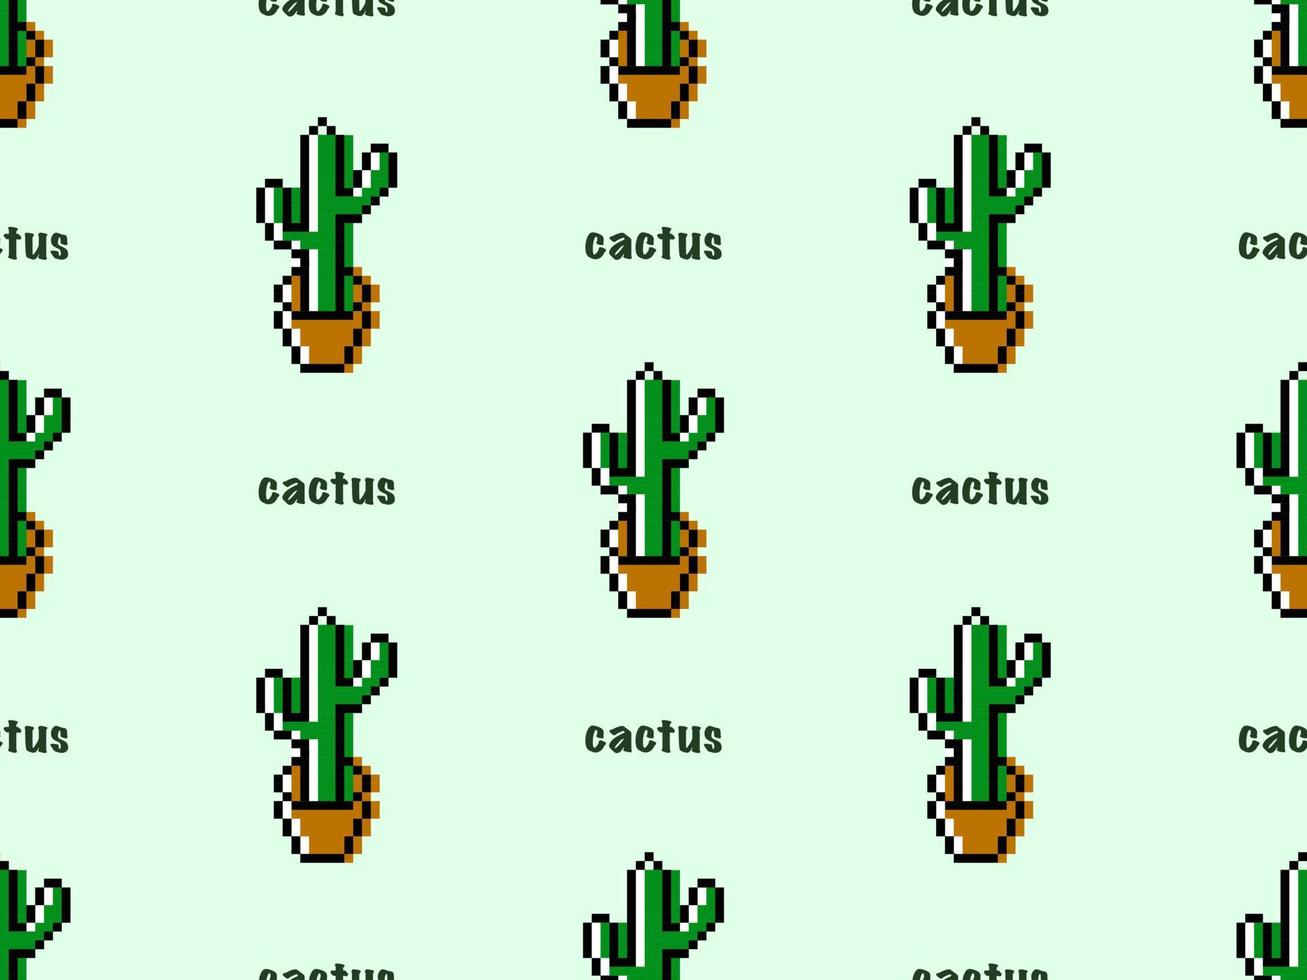 Cactus cartoon character seamless pattern on green background.Pixel style vector